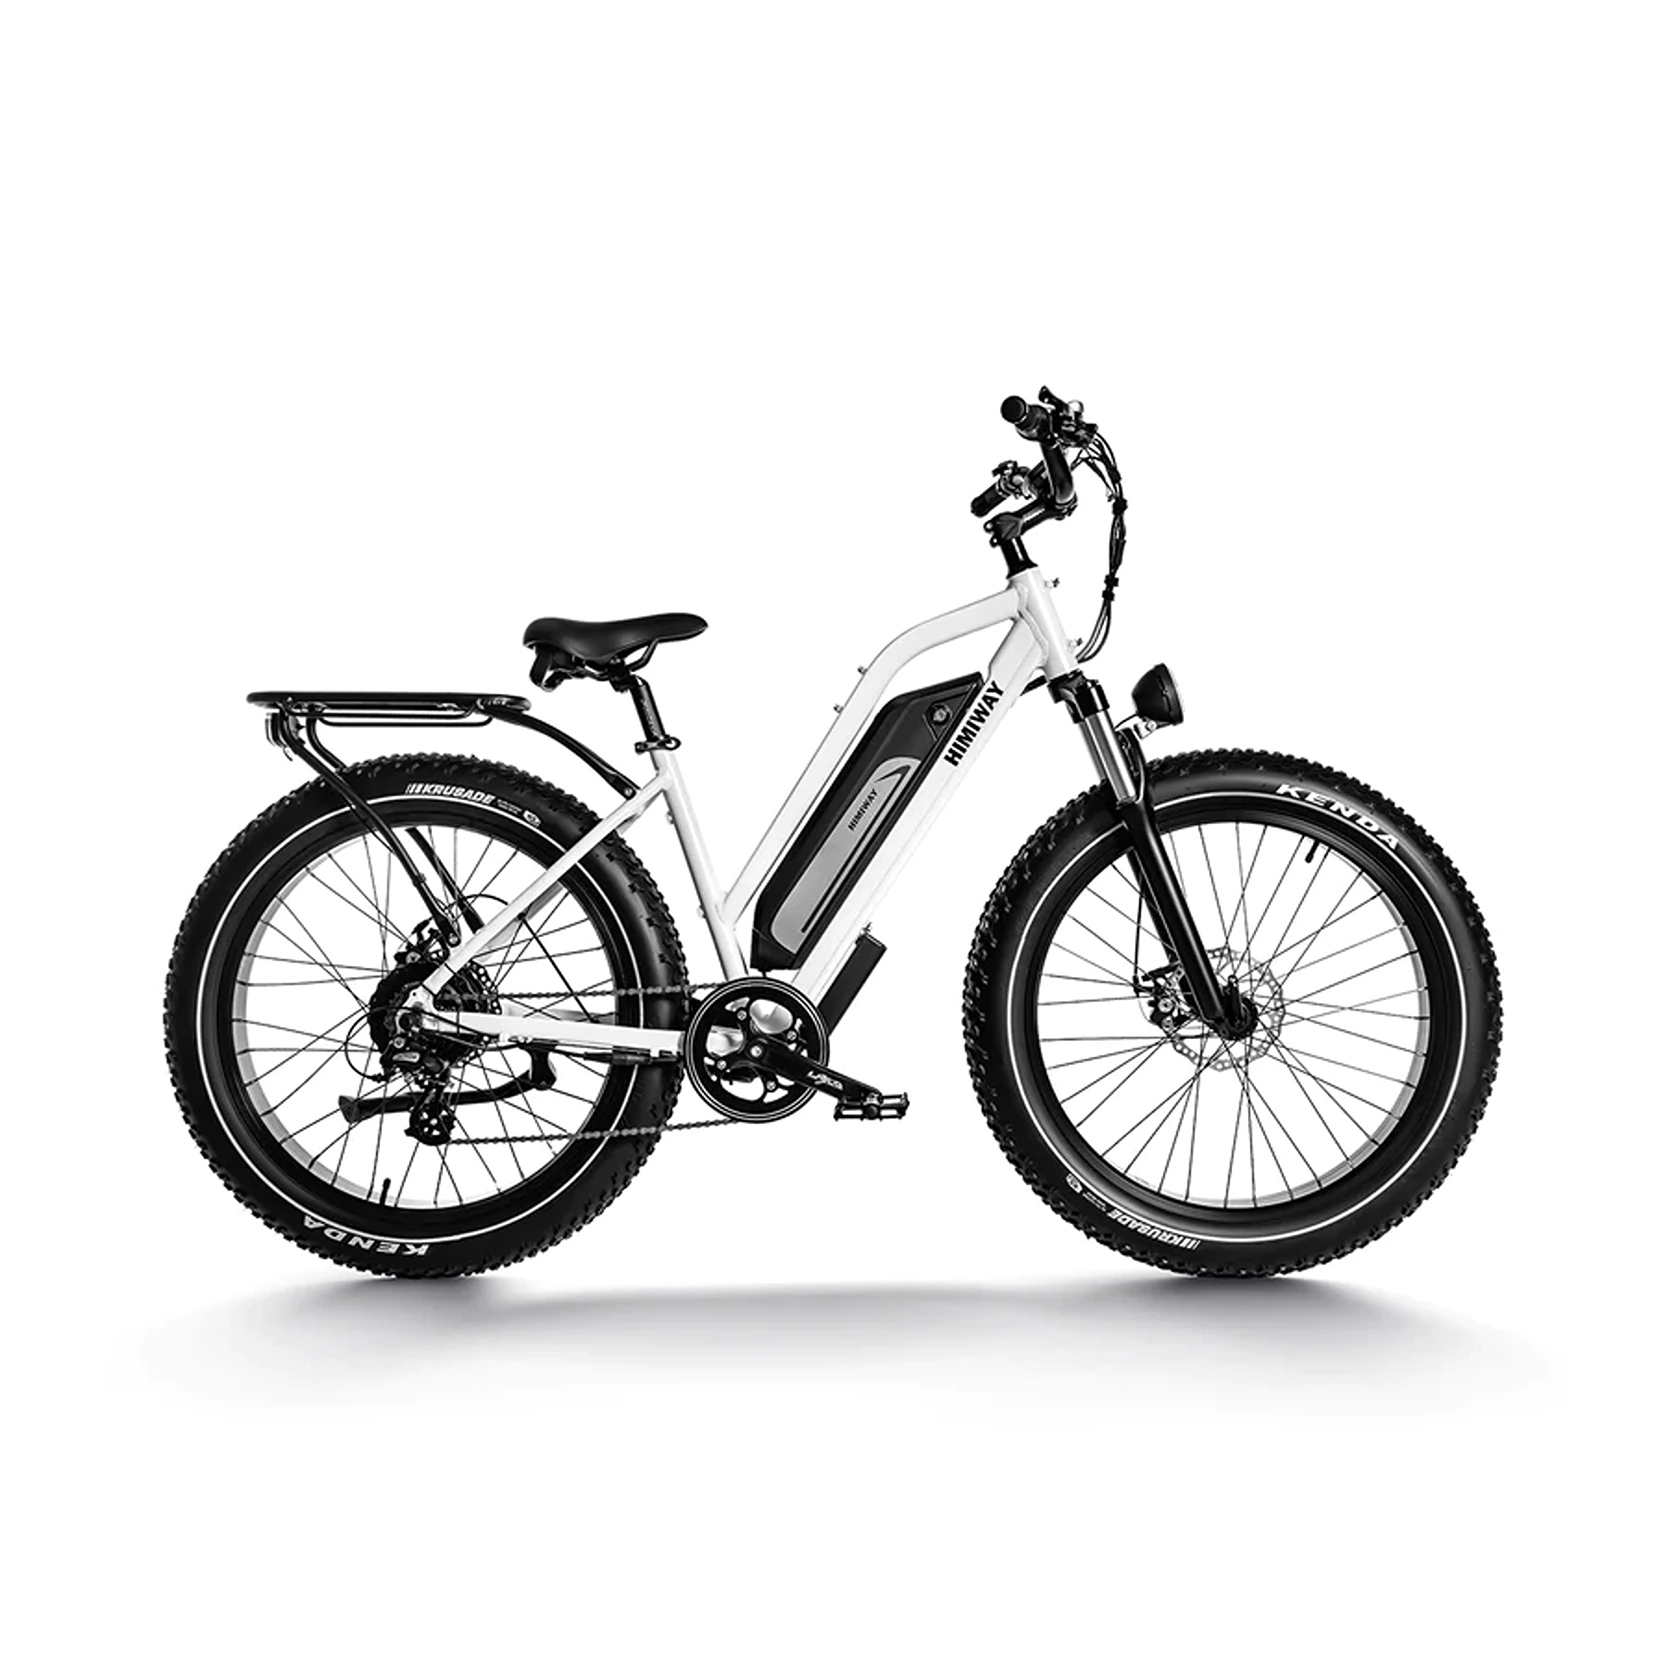 COWBOY 4 E-Bike: FIRST LOOK, unboxing & assembly (US/ENG) 